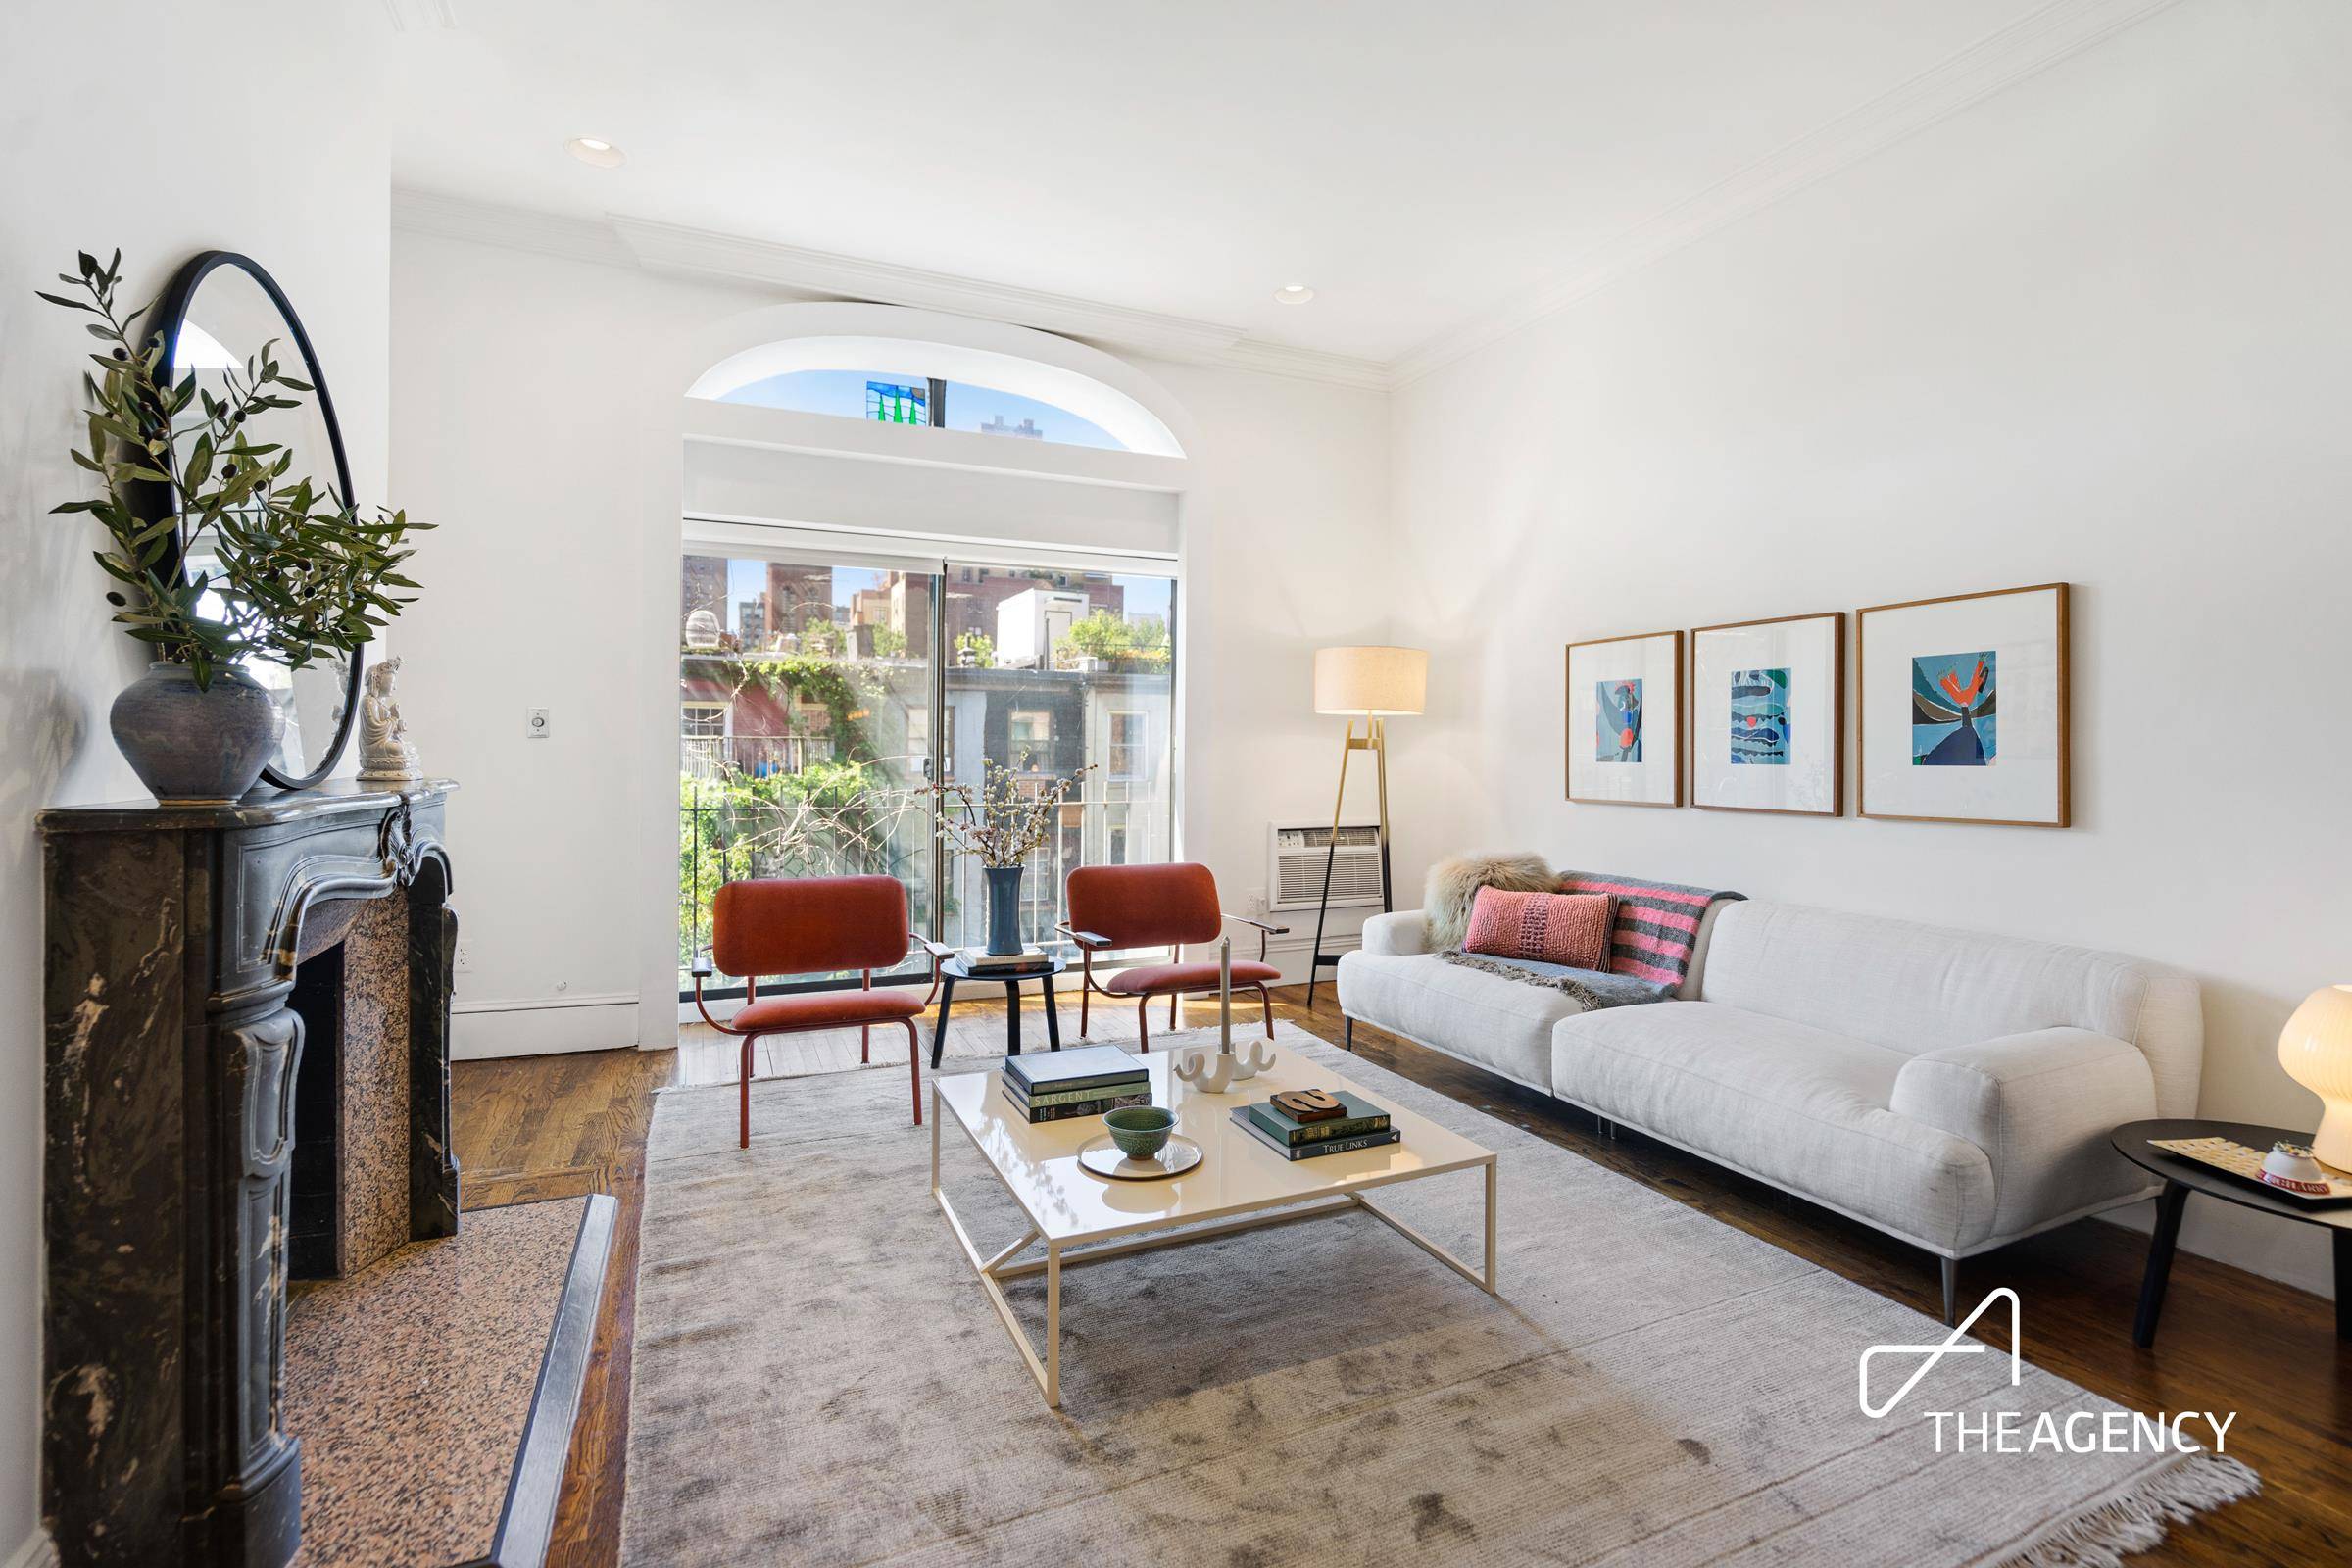 A rare Chelsea gem is now available, one of only 4 gracious units in a handsome 1900, boutique prewar townhouse co op.